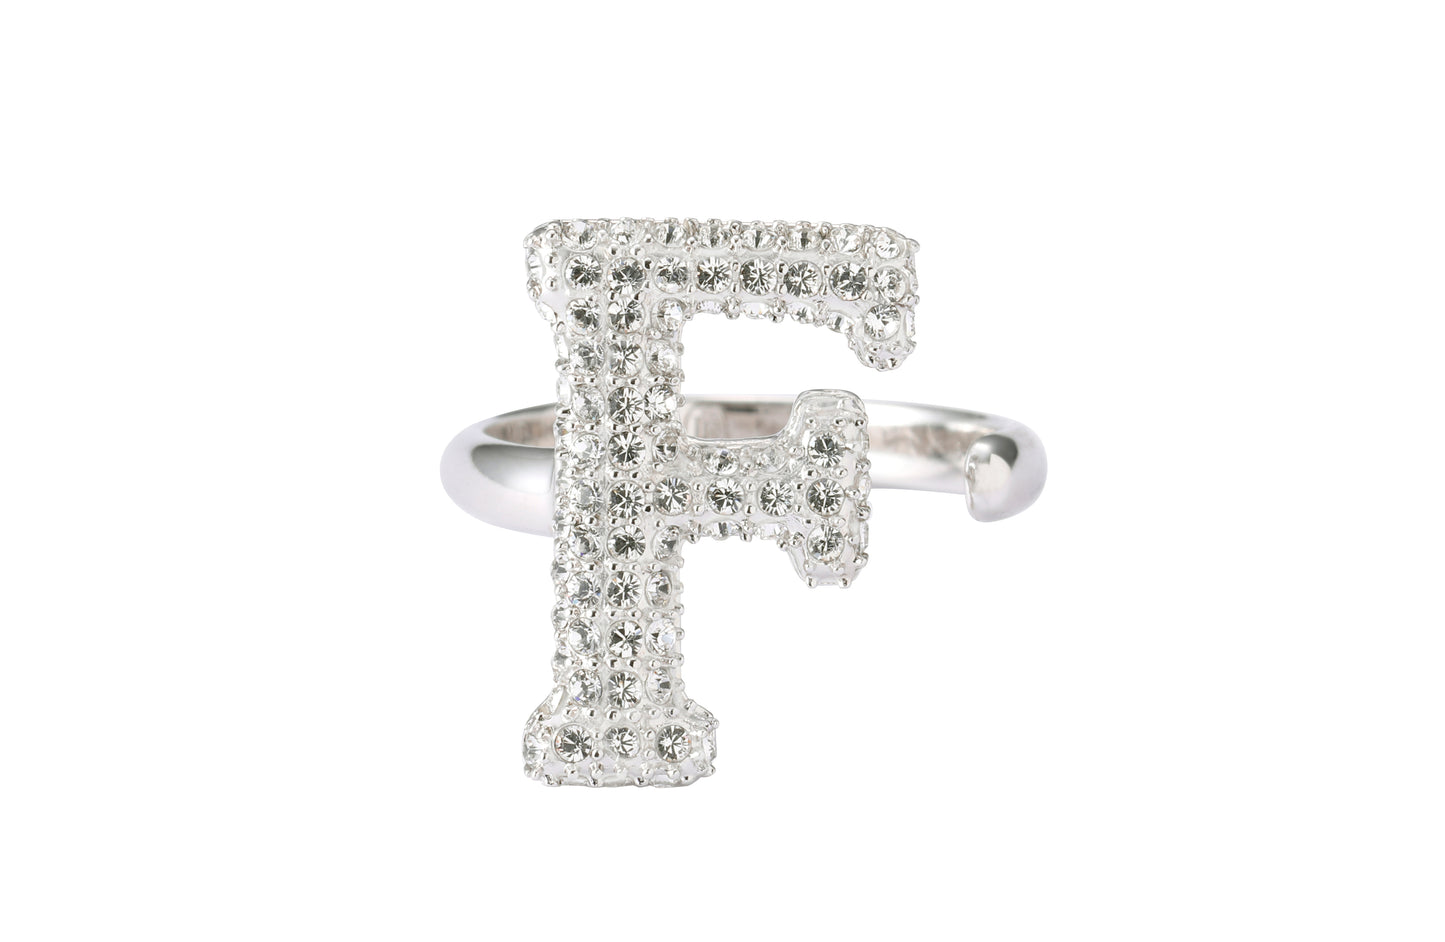 Alphabet Ring Initial F Swarovski Crystals Free Size Sterling Silver 925 Rhodium Plated